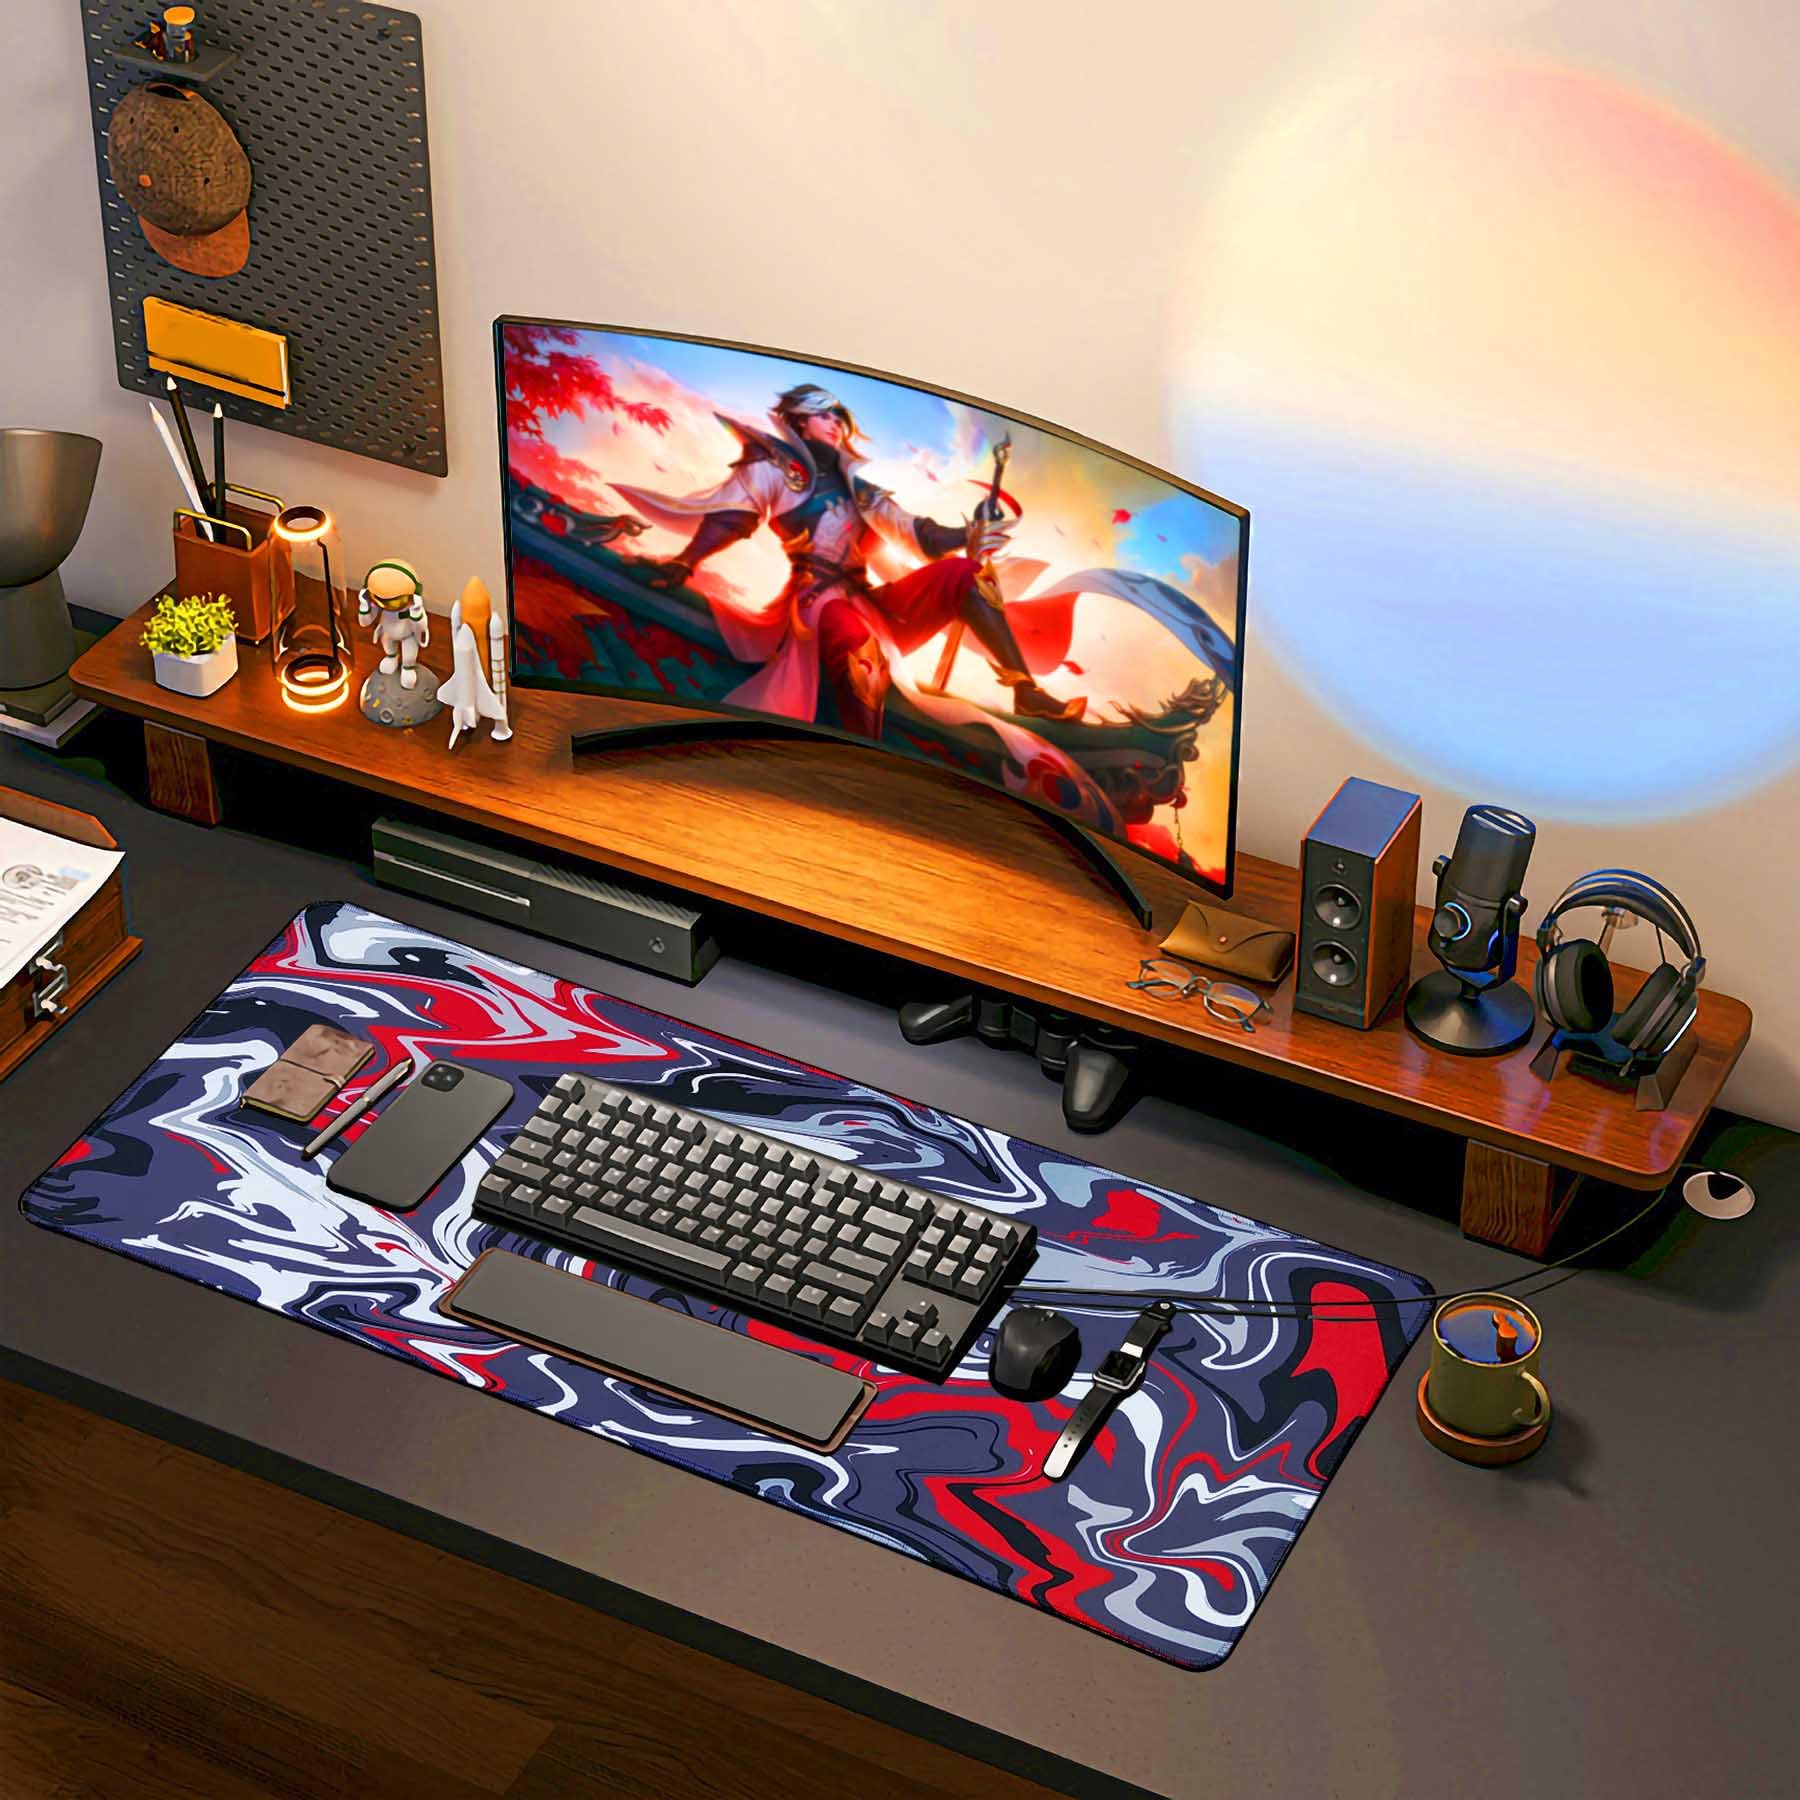 Large Gaming Mouse Pad,Gaming Mousepad,Large Mouse Pad for Desk, 31.5x11.8inch, XXL Desk Pad, Non-Slip Keyboard pad,Laptop Desk Pad,Water Proof Desk Writing Pad for Game,Office Home - amzGamess